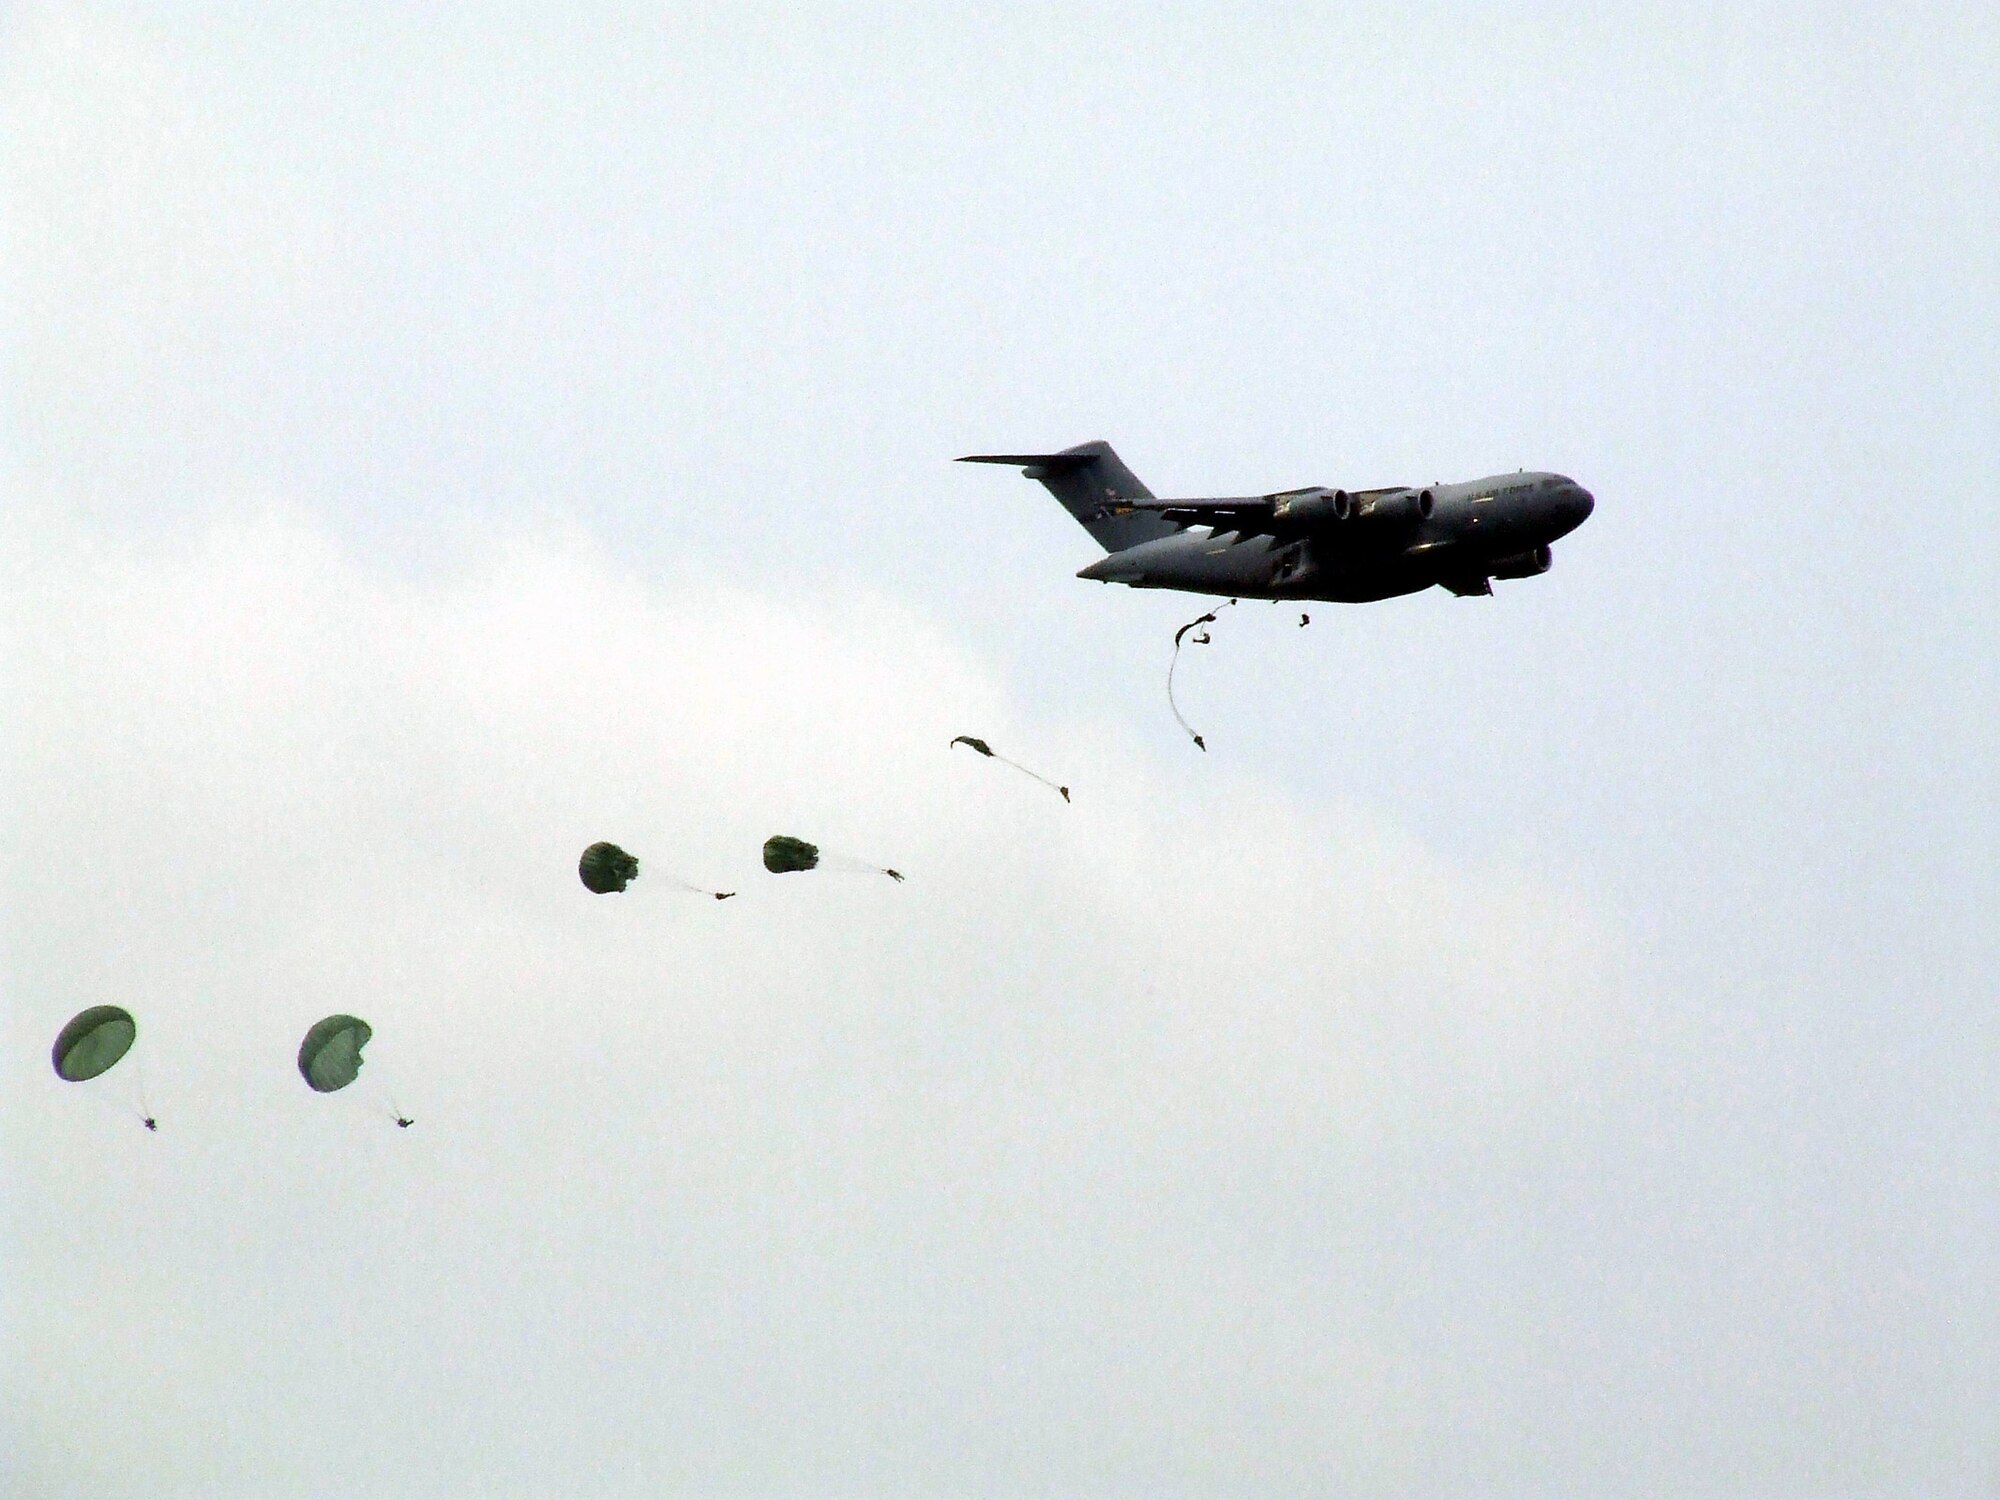 Paratroopers from the U.S. Army's 82nd Airborne Division jump from a McGuire Air Force Base, N.J., C-17 Globemaster III during an event for McGuire Air Expo 2008 May 31.  The expo drew more than 170,000 visitors over two days and it was the culminating event for Air Force Week in Philadelphia.  (U.S. Air Force Photo/Tech. Sgt. Scott T. Sturkol)